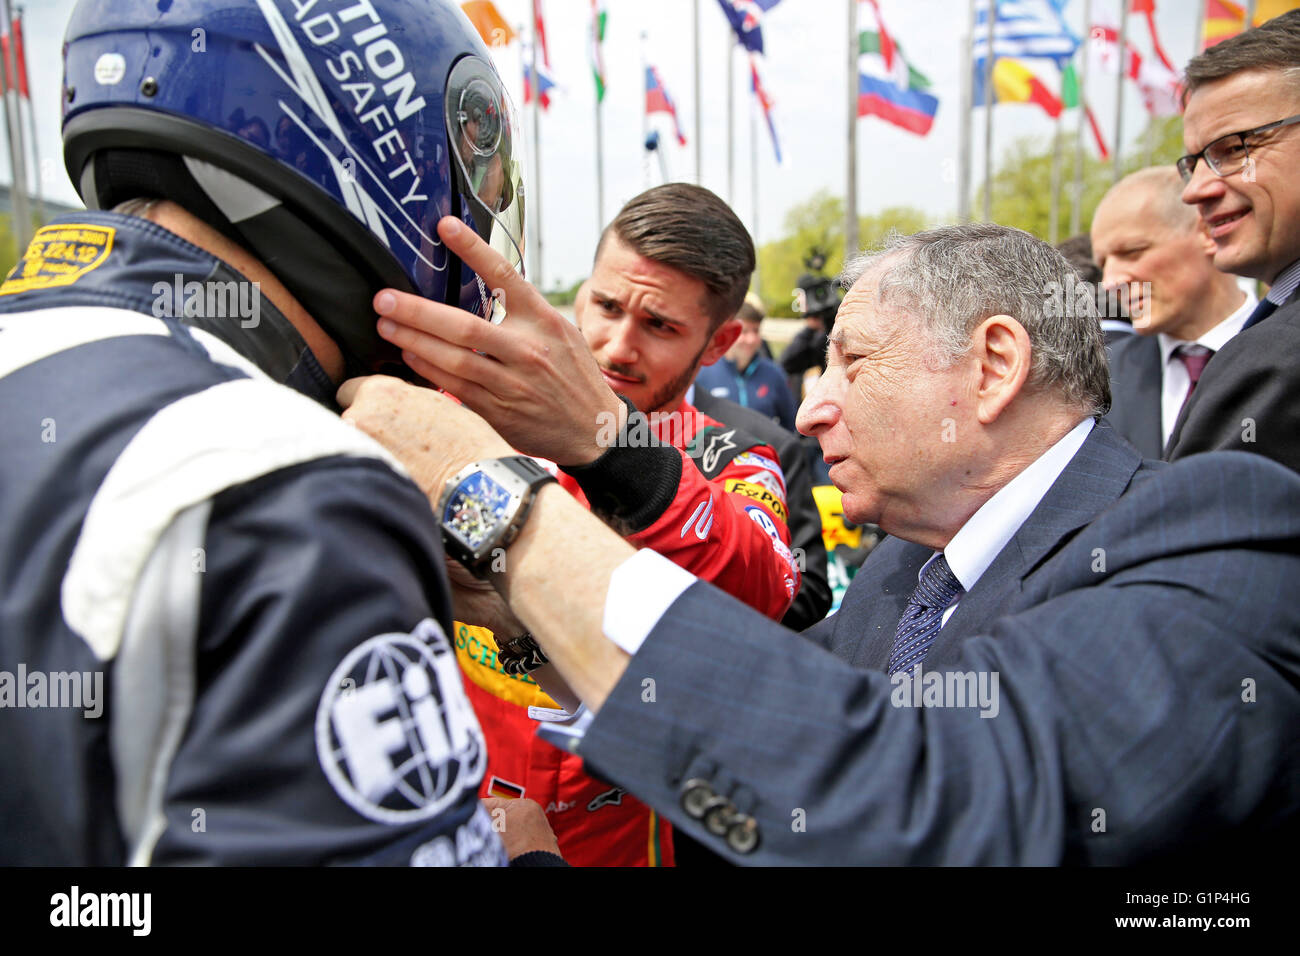 Leipzig, Germany. 18th May, 2016. Jean Todt (front R), president of the International Automobile Federation (FIA), attempts to help Jose Viegas (L), secretary general of the International Transport Forum (ITF), put on a helmet prior to taking a trip in an electric Formula E racing car at the world summit of transport ministers in Leipzig, Germany, 18 May 2016. Some 1,000 participants from 60 countries are expected to attend the three-day summit held by the International Transport Forum of the Organisation for Economic Co-operation and Development (OECD). Photo: JAN WOITAS/dpa/Alamy Live News Stock Photo